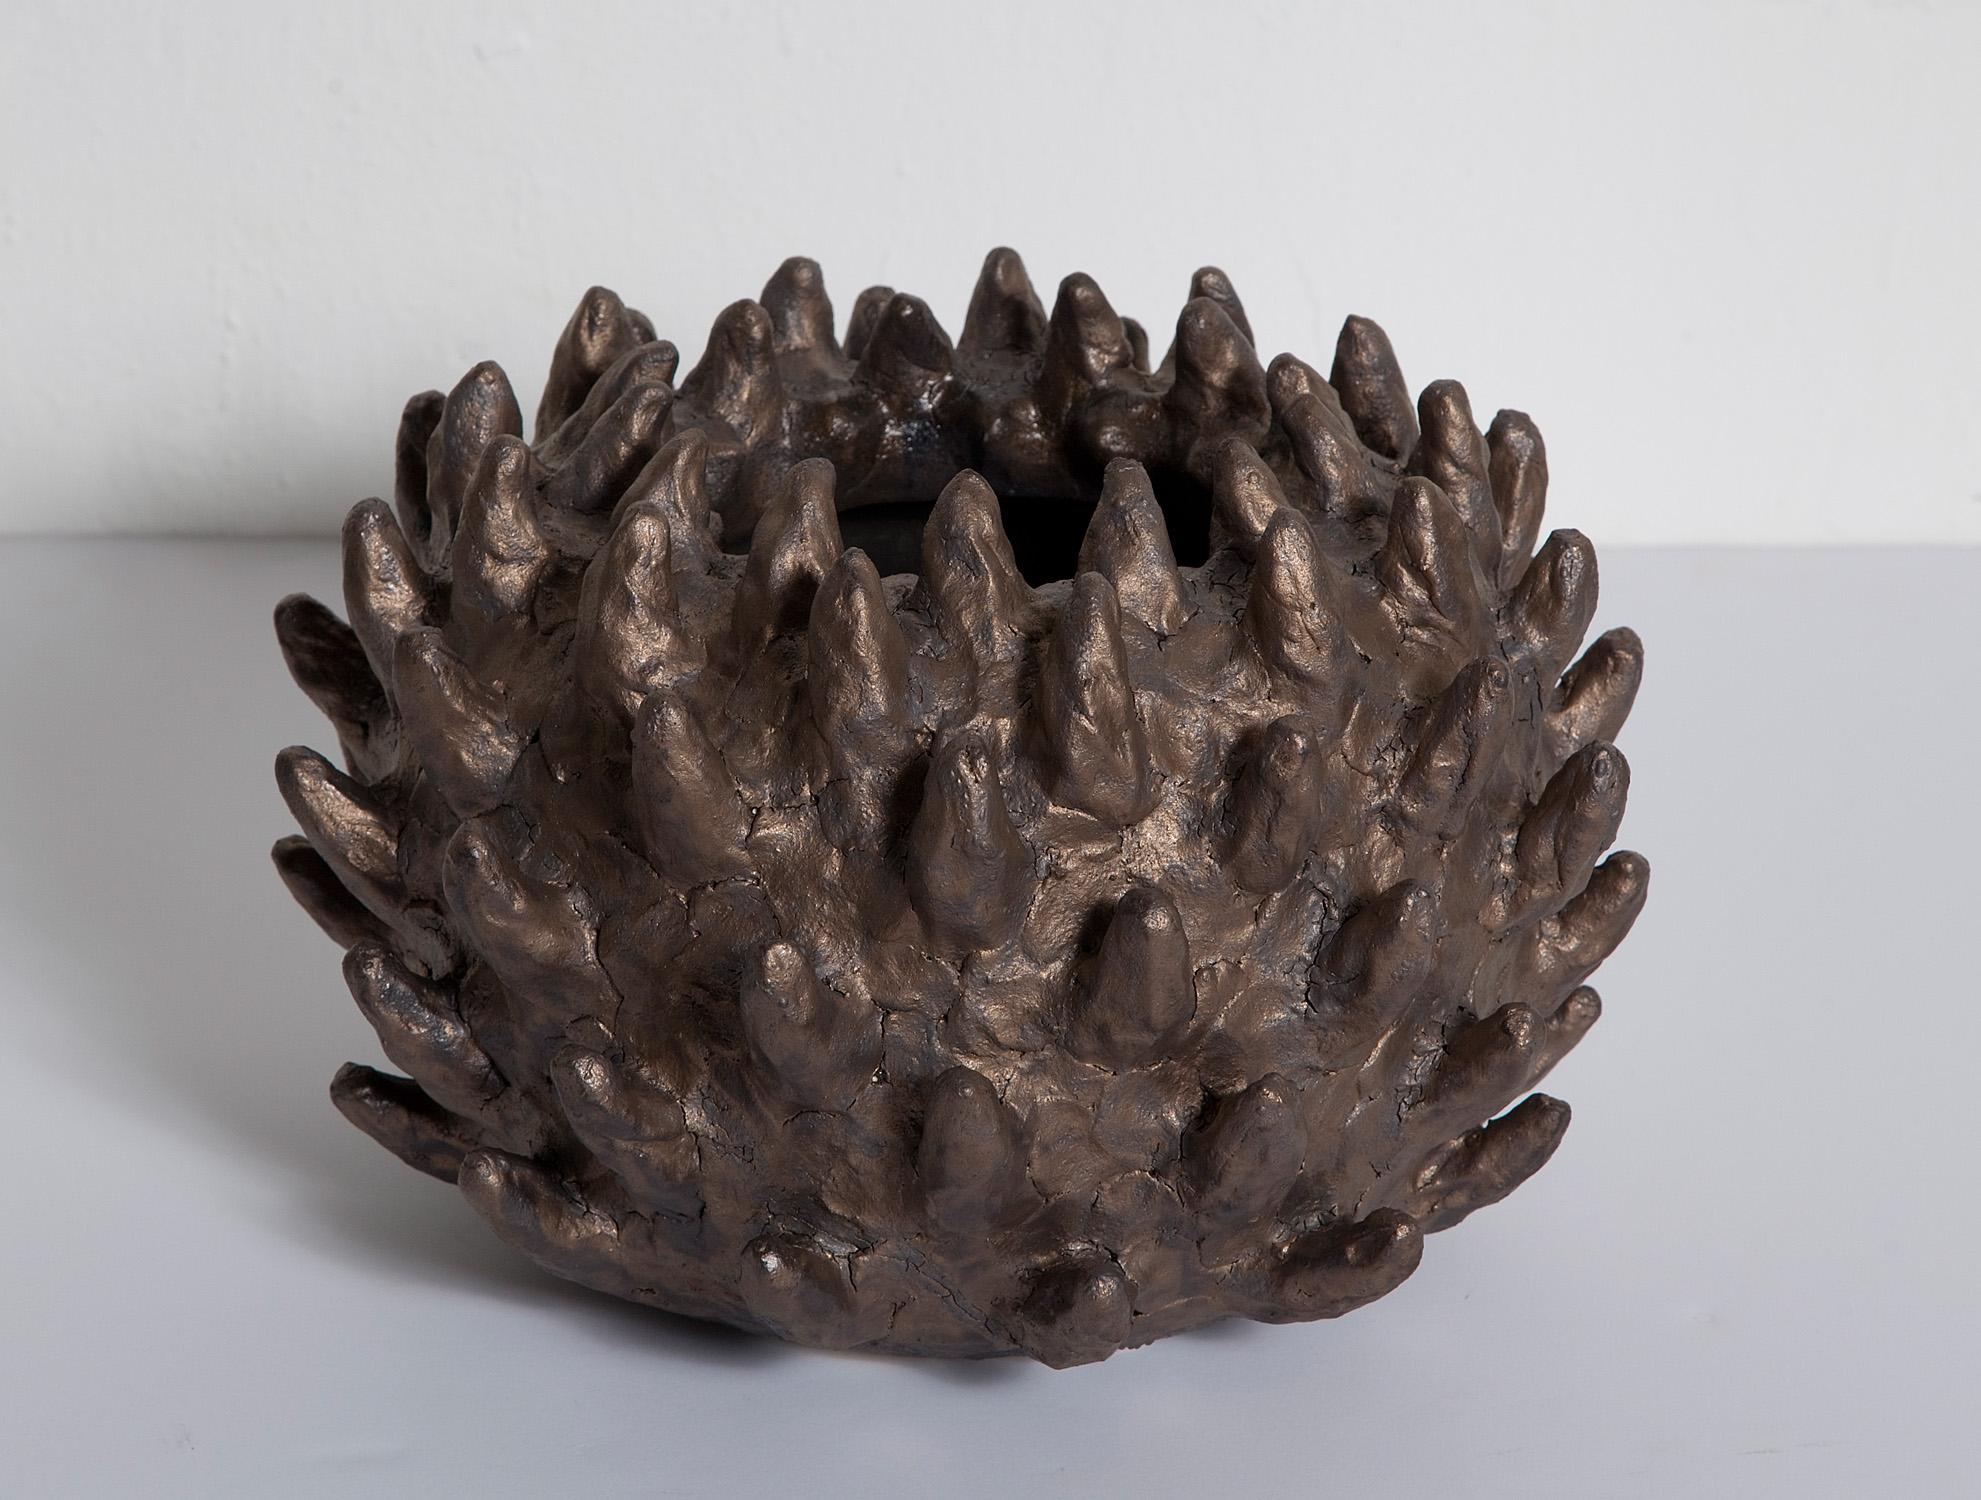 Organic Modern Handmade Bronze Ceramic Bowl by Priscilla Hollingsworth, Exclusively for Stripe